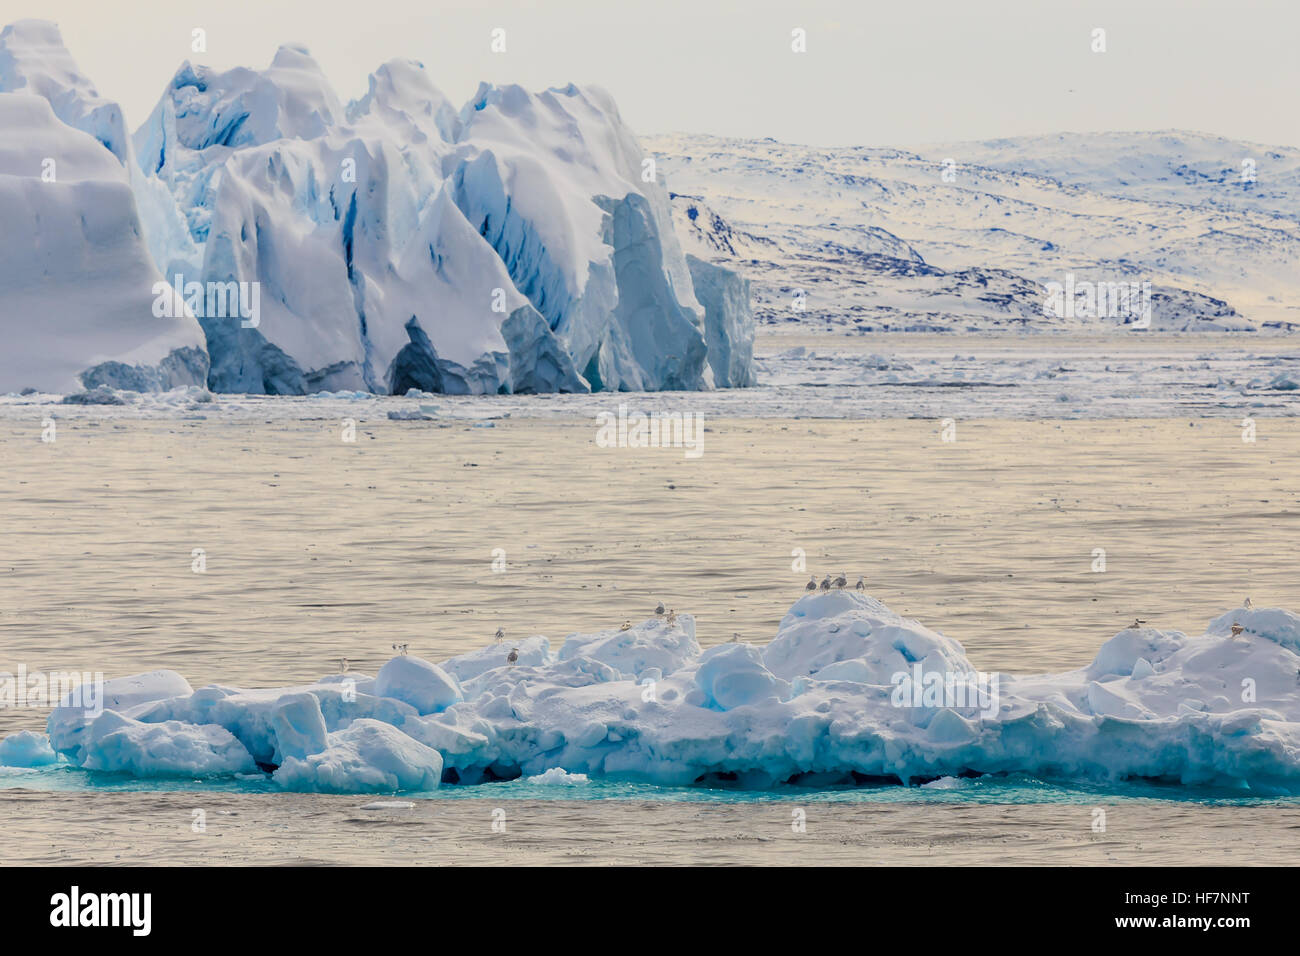 Huge drifting blue icebergs with sitting seagulls at Ilulissat fjord Stock Photo